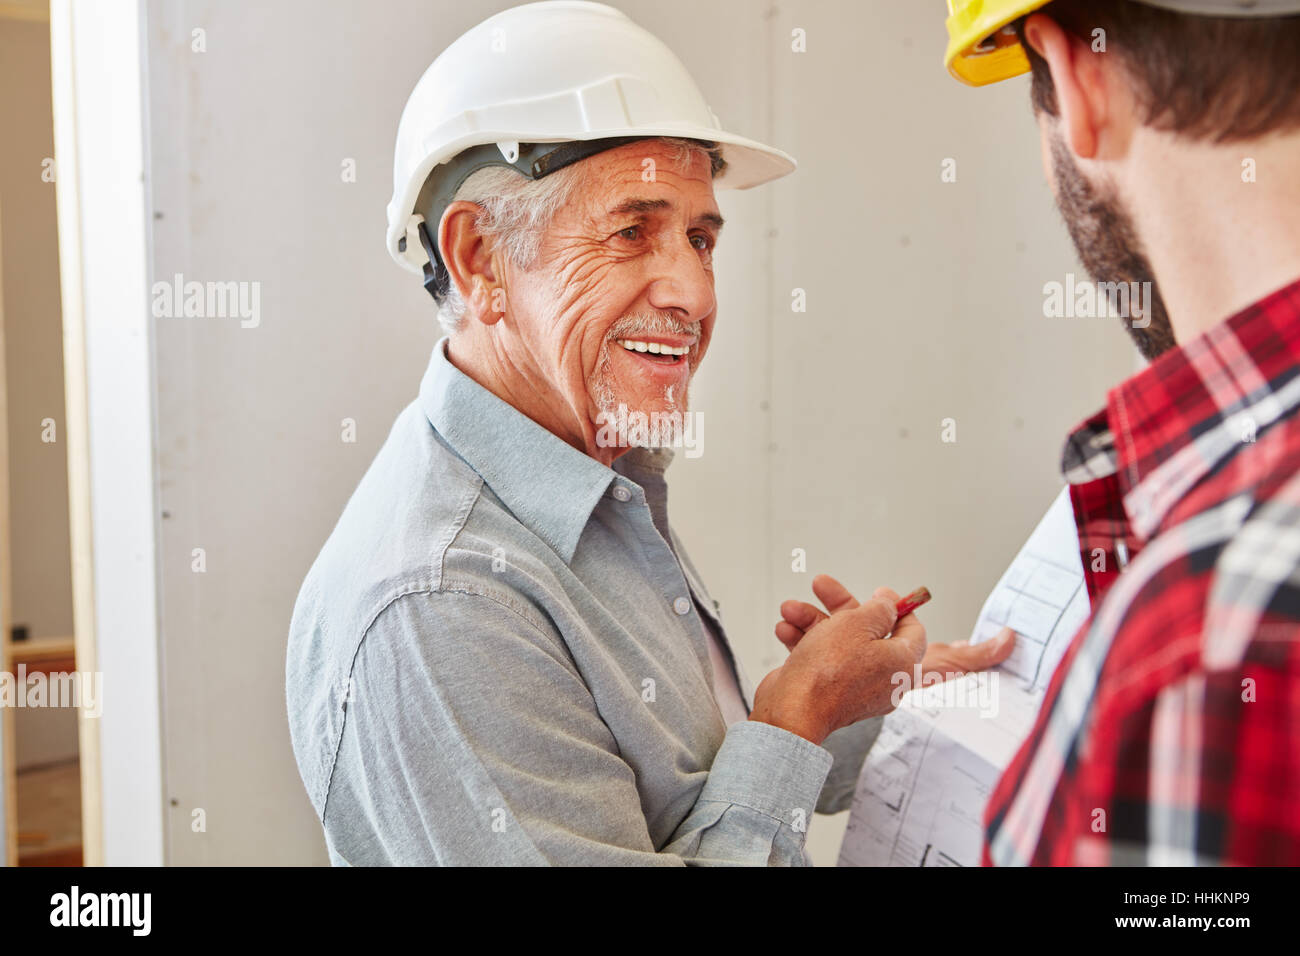 Senior citizen as craftsman with experience cooperating with foreman Stock Photo